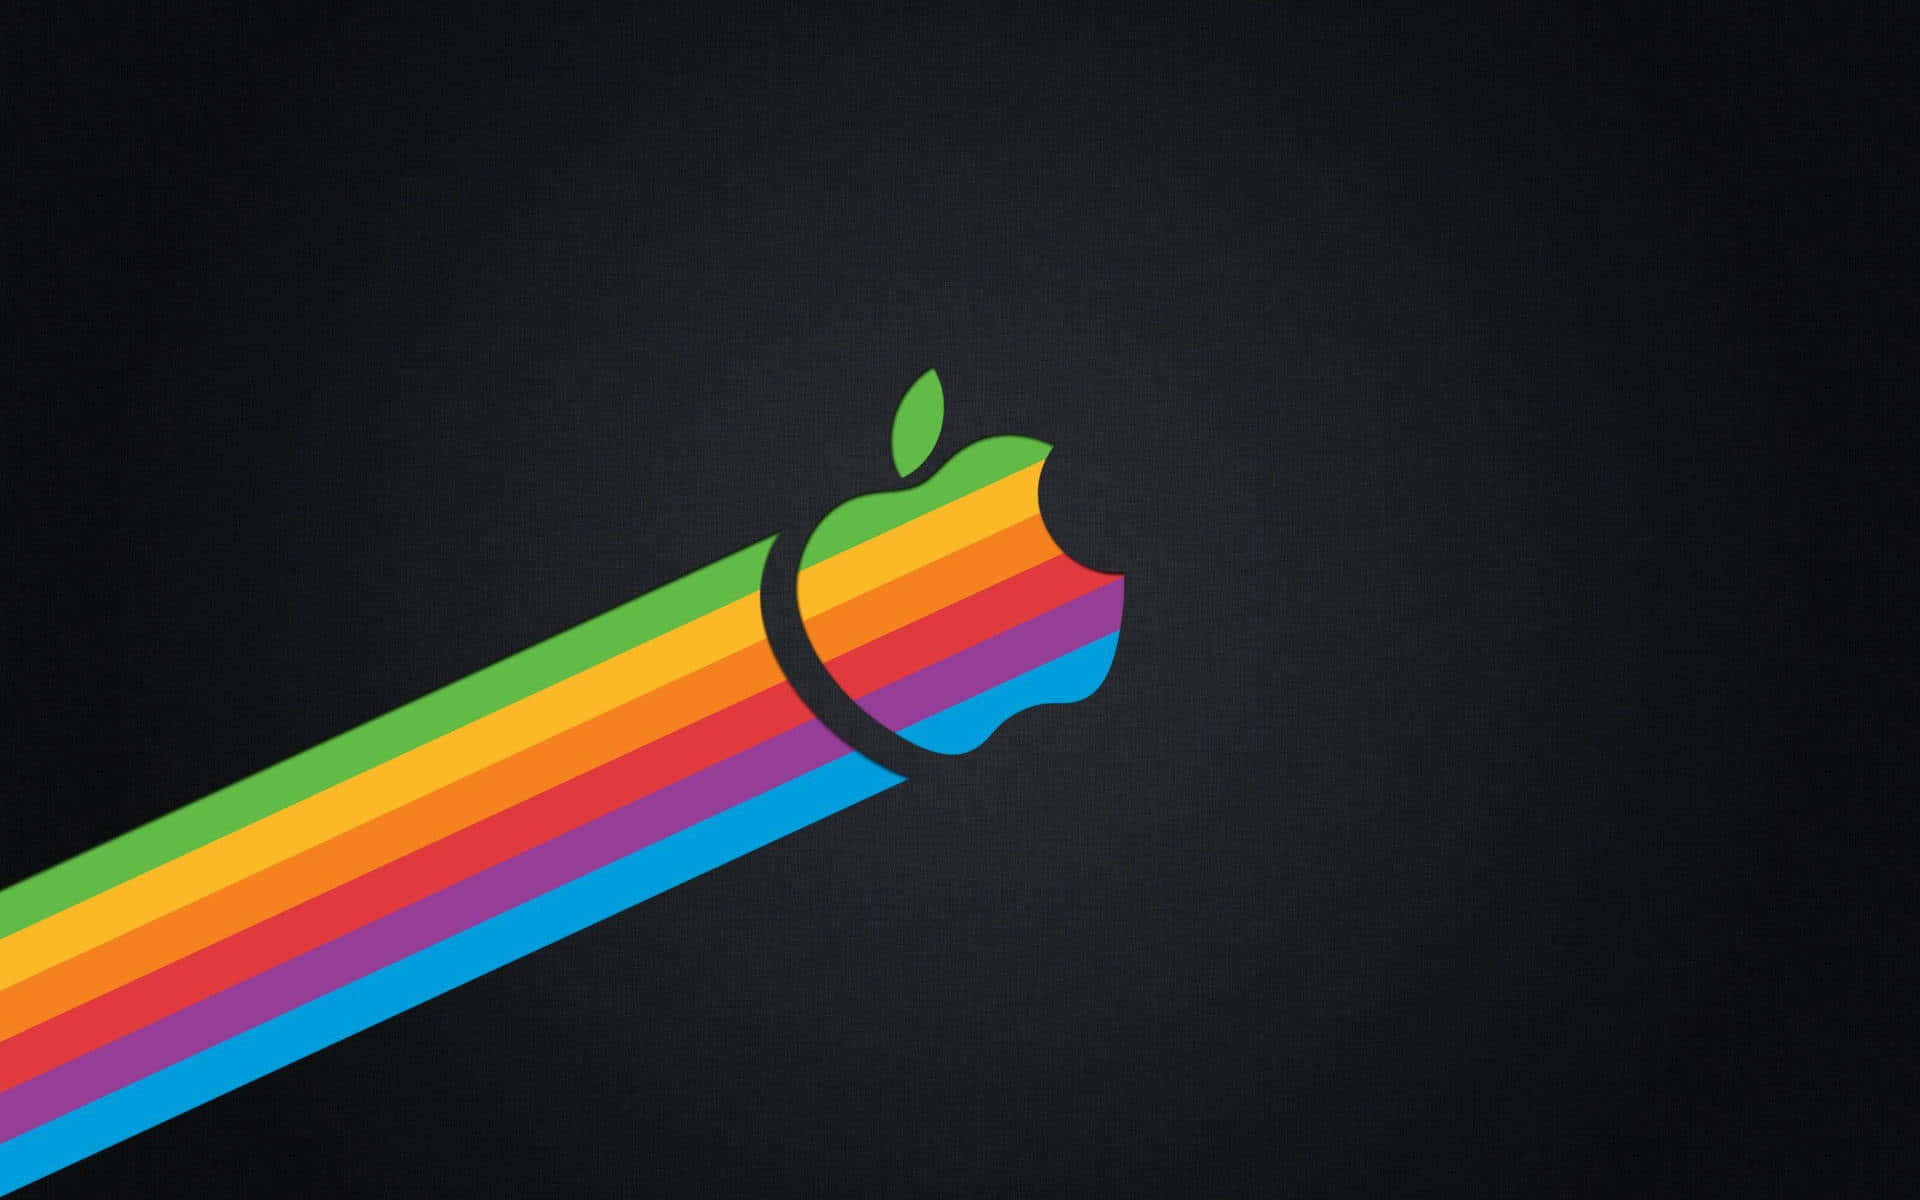 A 4k resolution close-up of a juicy apple Wallpaper